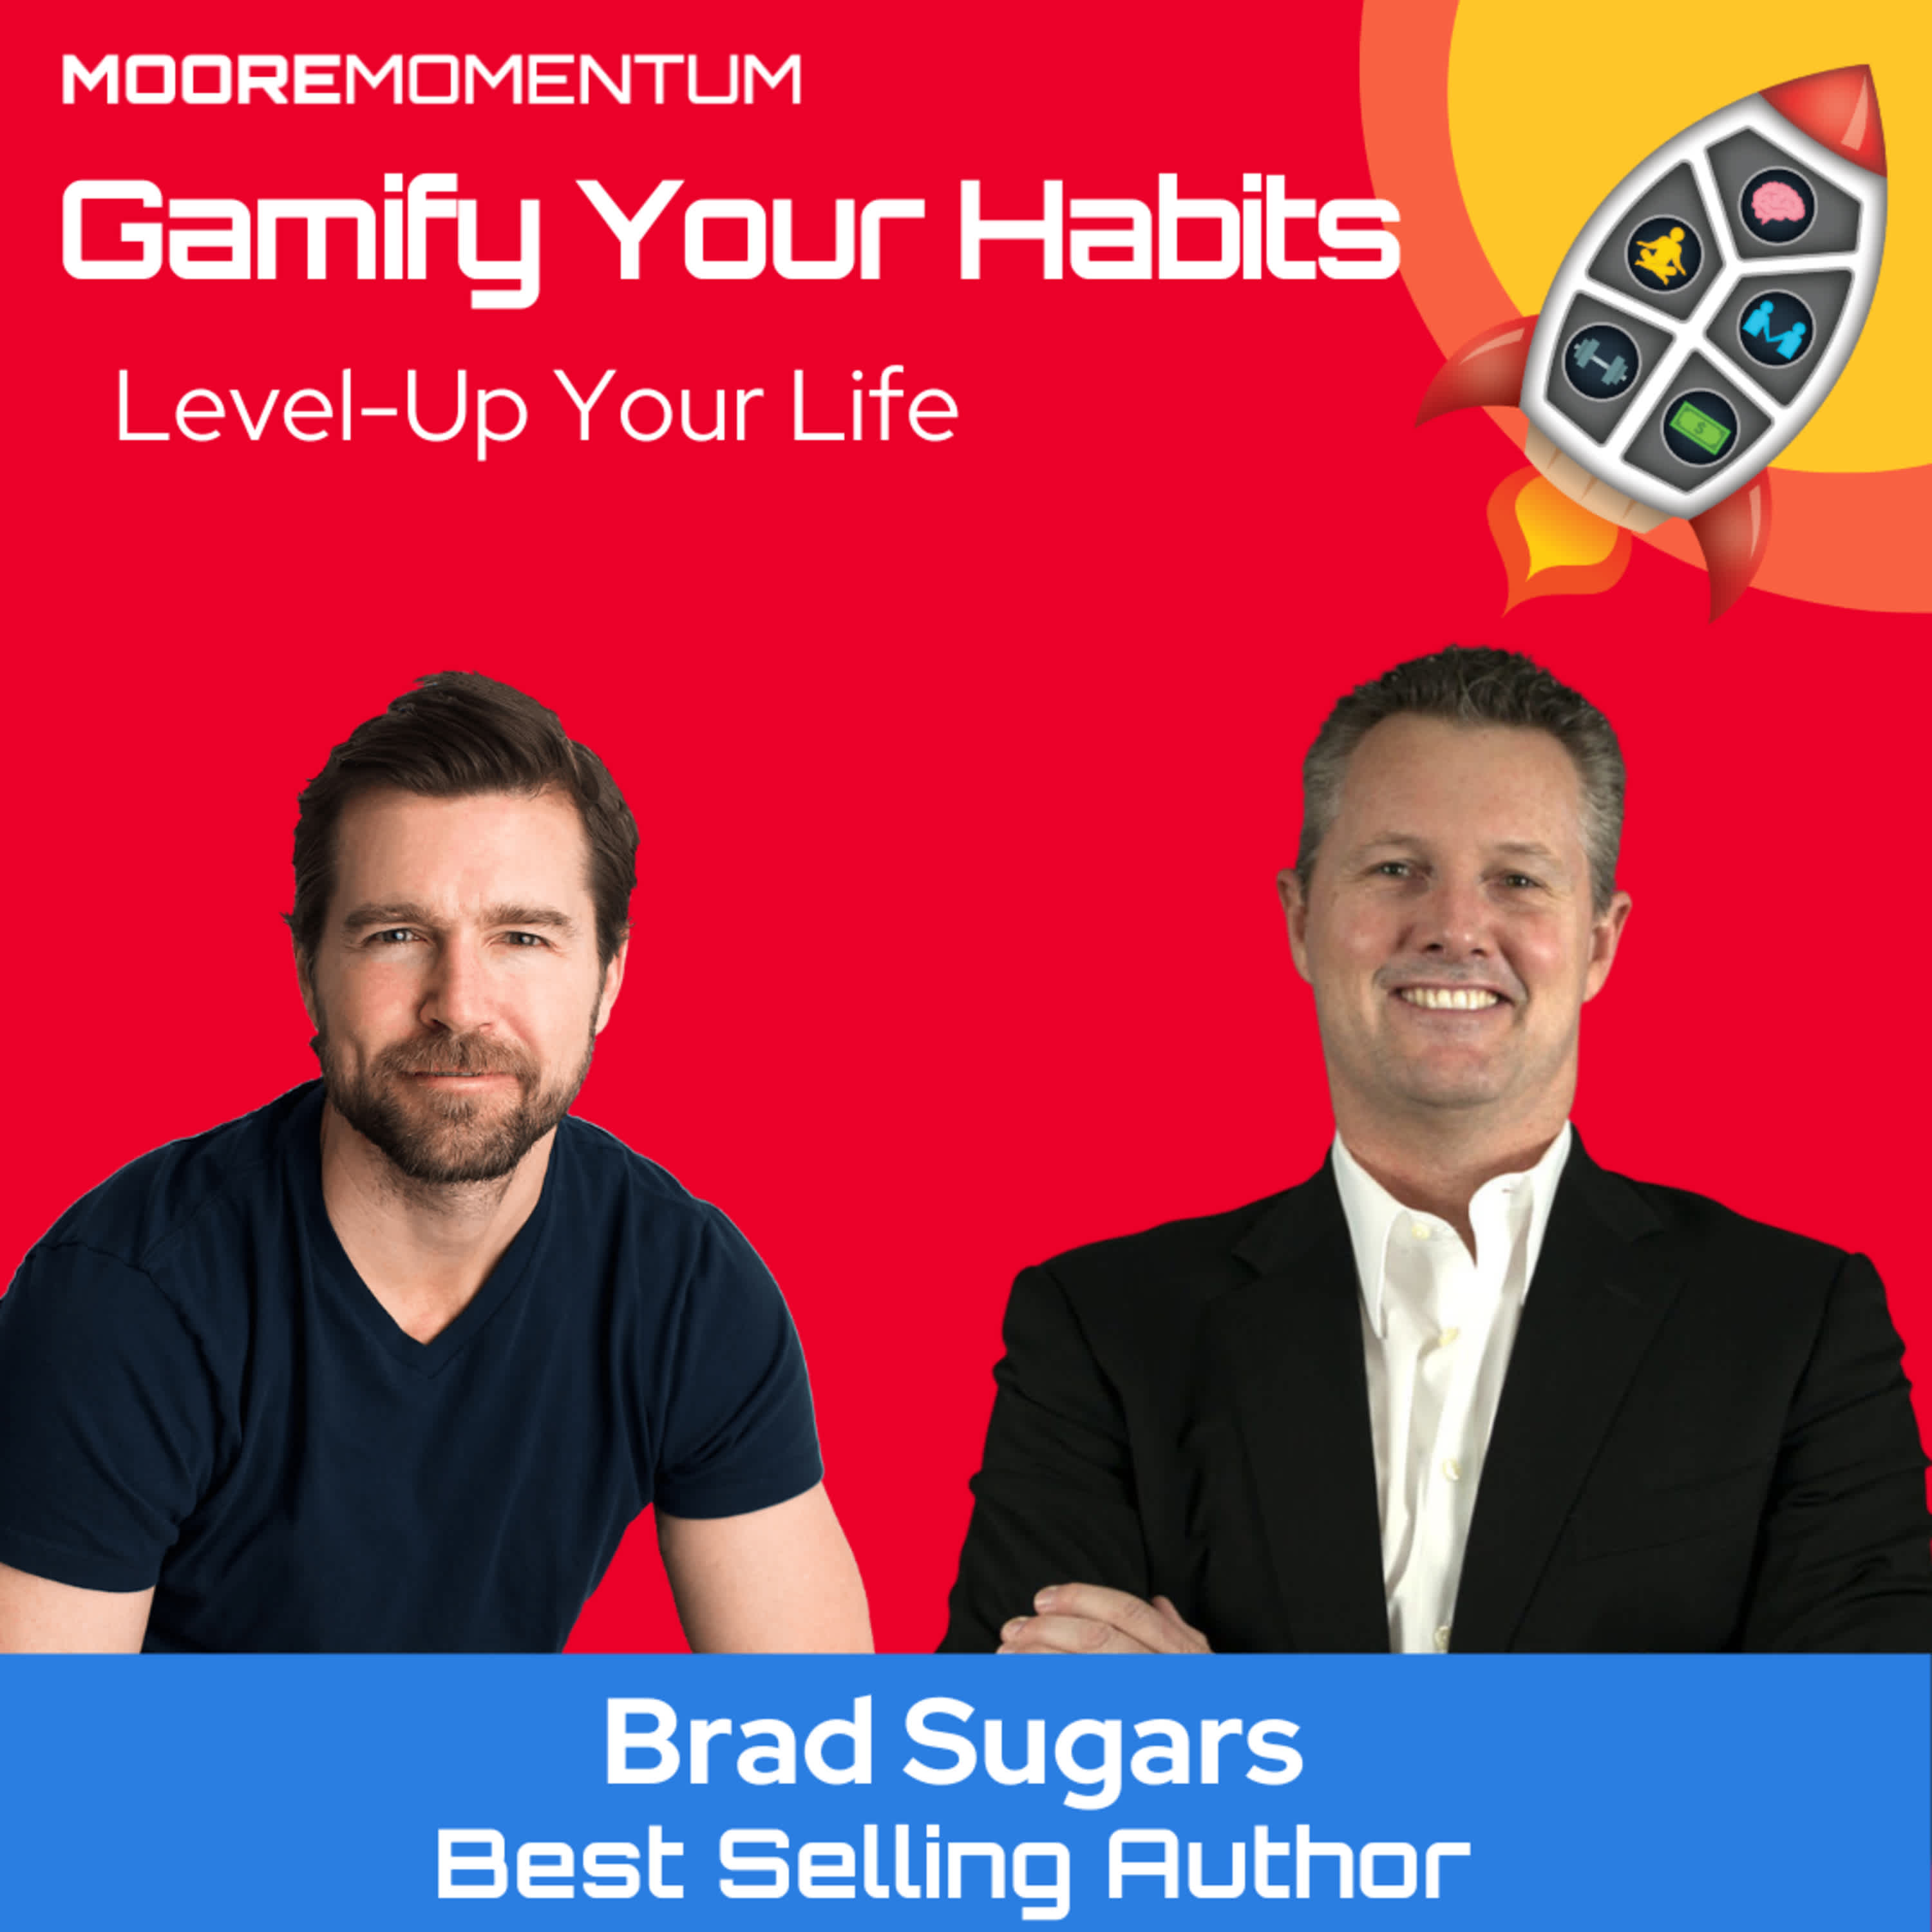 In Become Unstoppable: Growth Strategies for Startups, host Will Moore sits down with Brad Sugars—bestselling author, keynote speaker, and top business coach. 